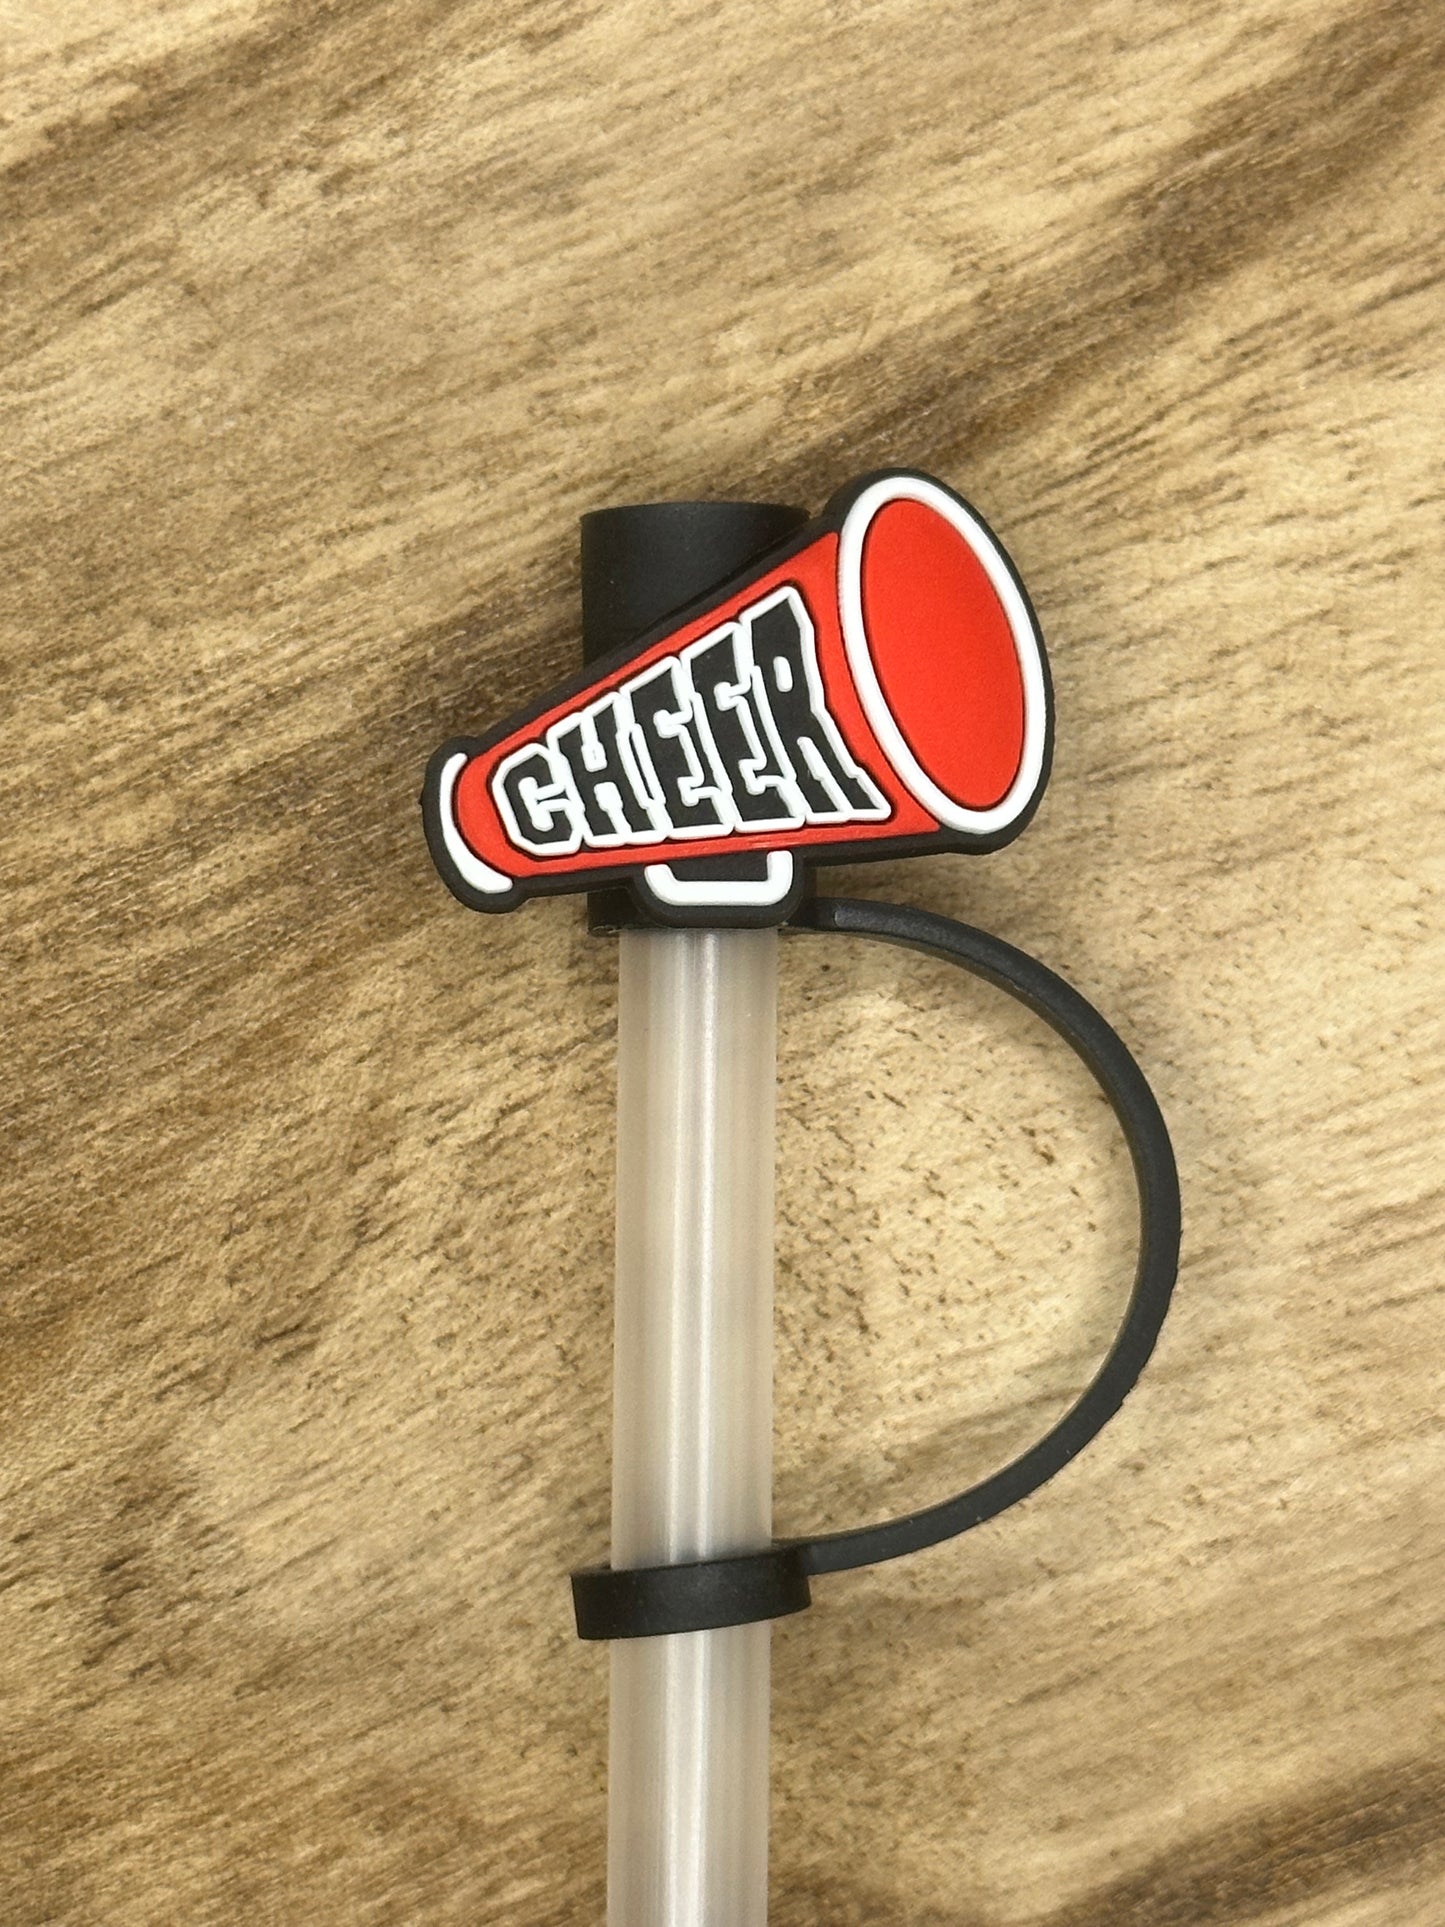 Cheer Straw Toppers | Tumbler Accessory | Sports Fan Gift